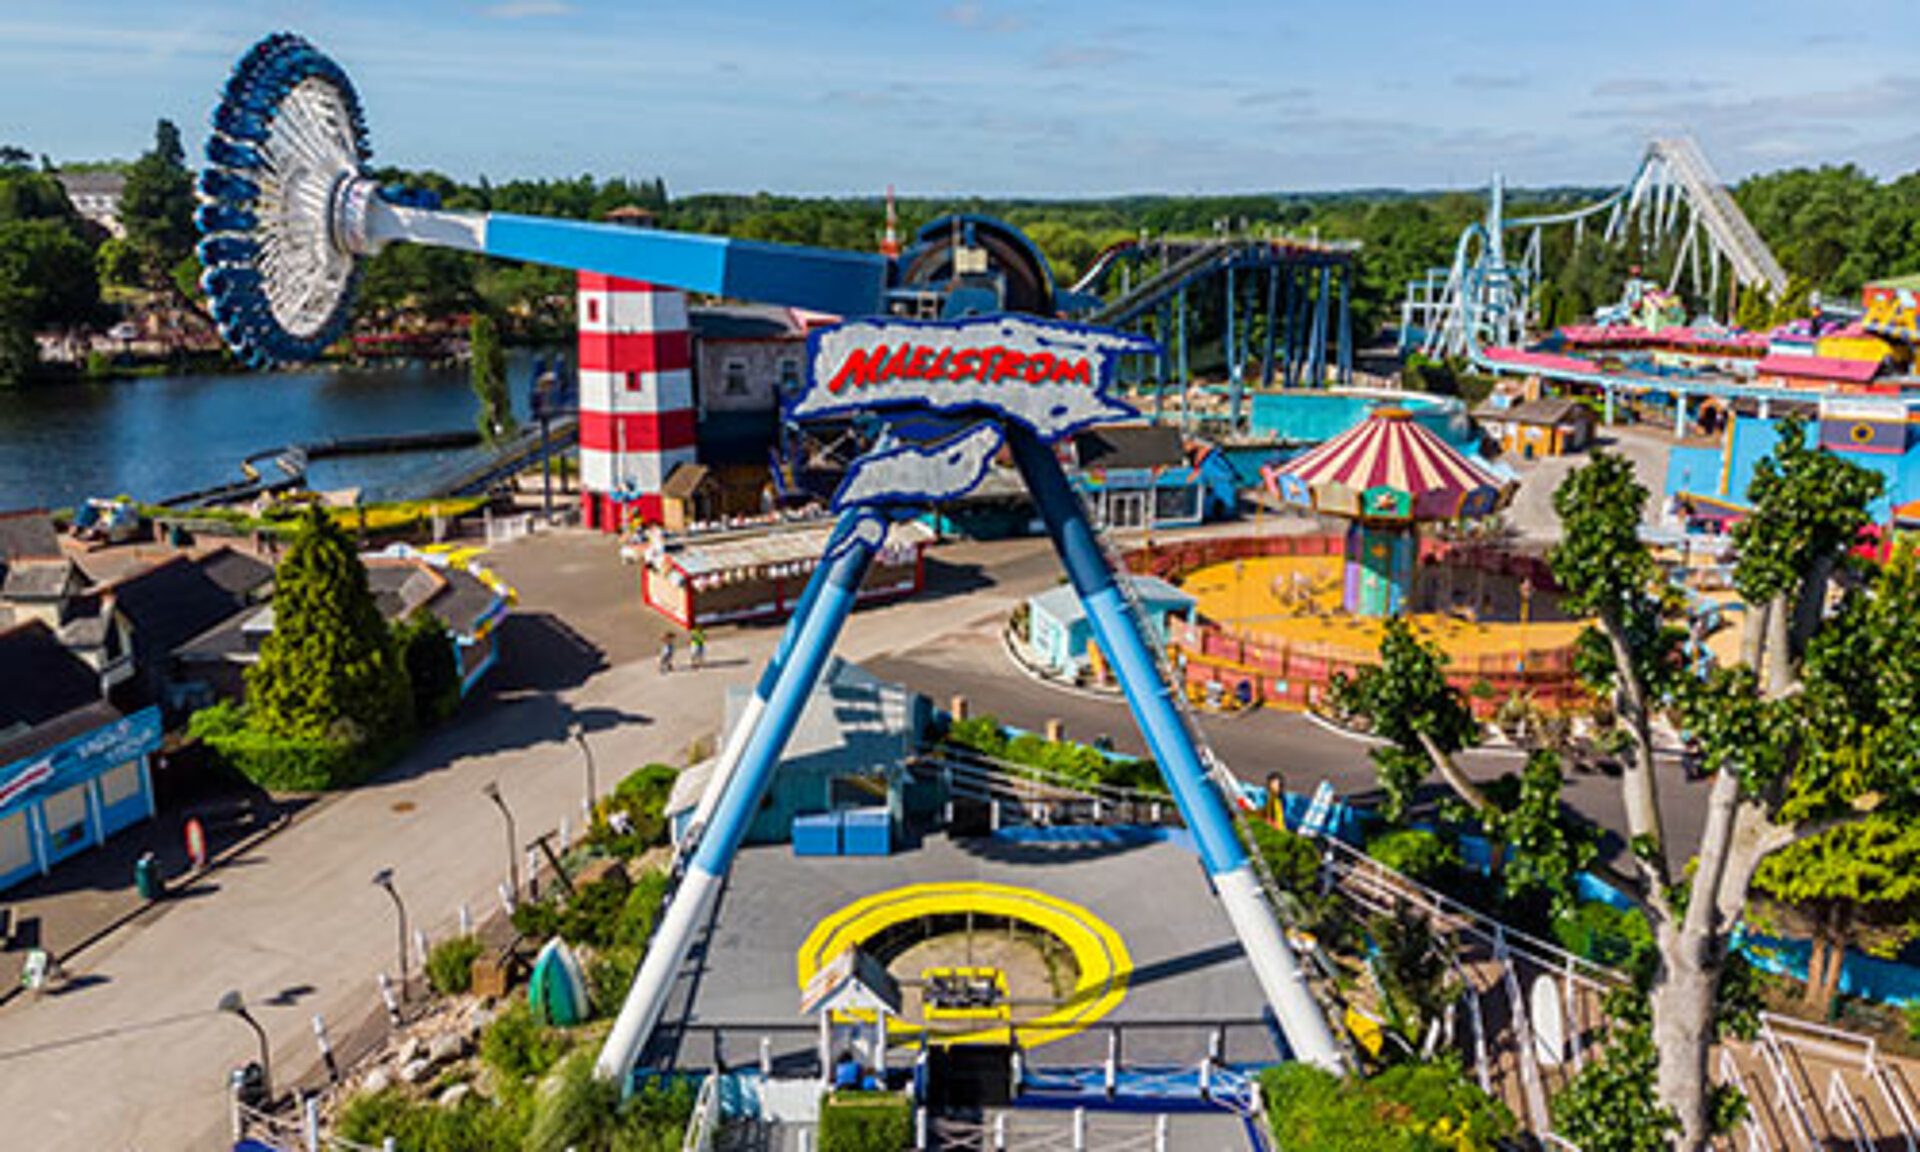 Aerial shot of Maelstrom and surrounding area